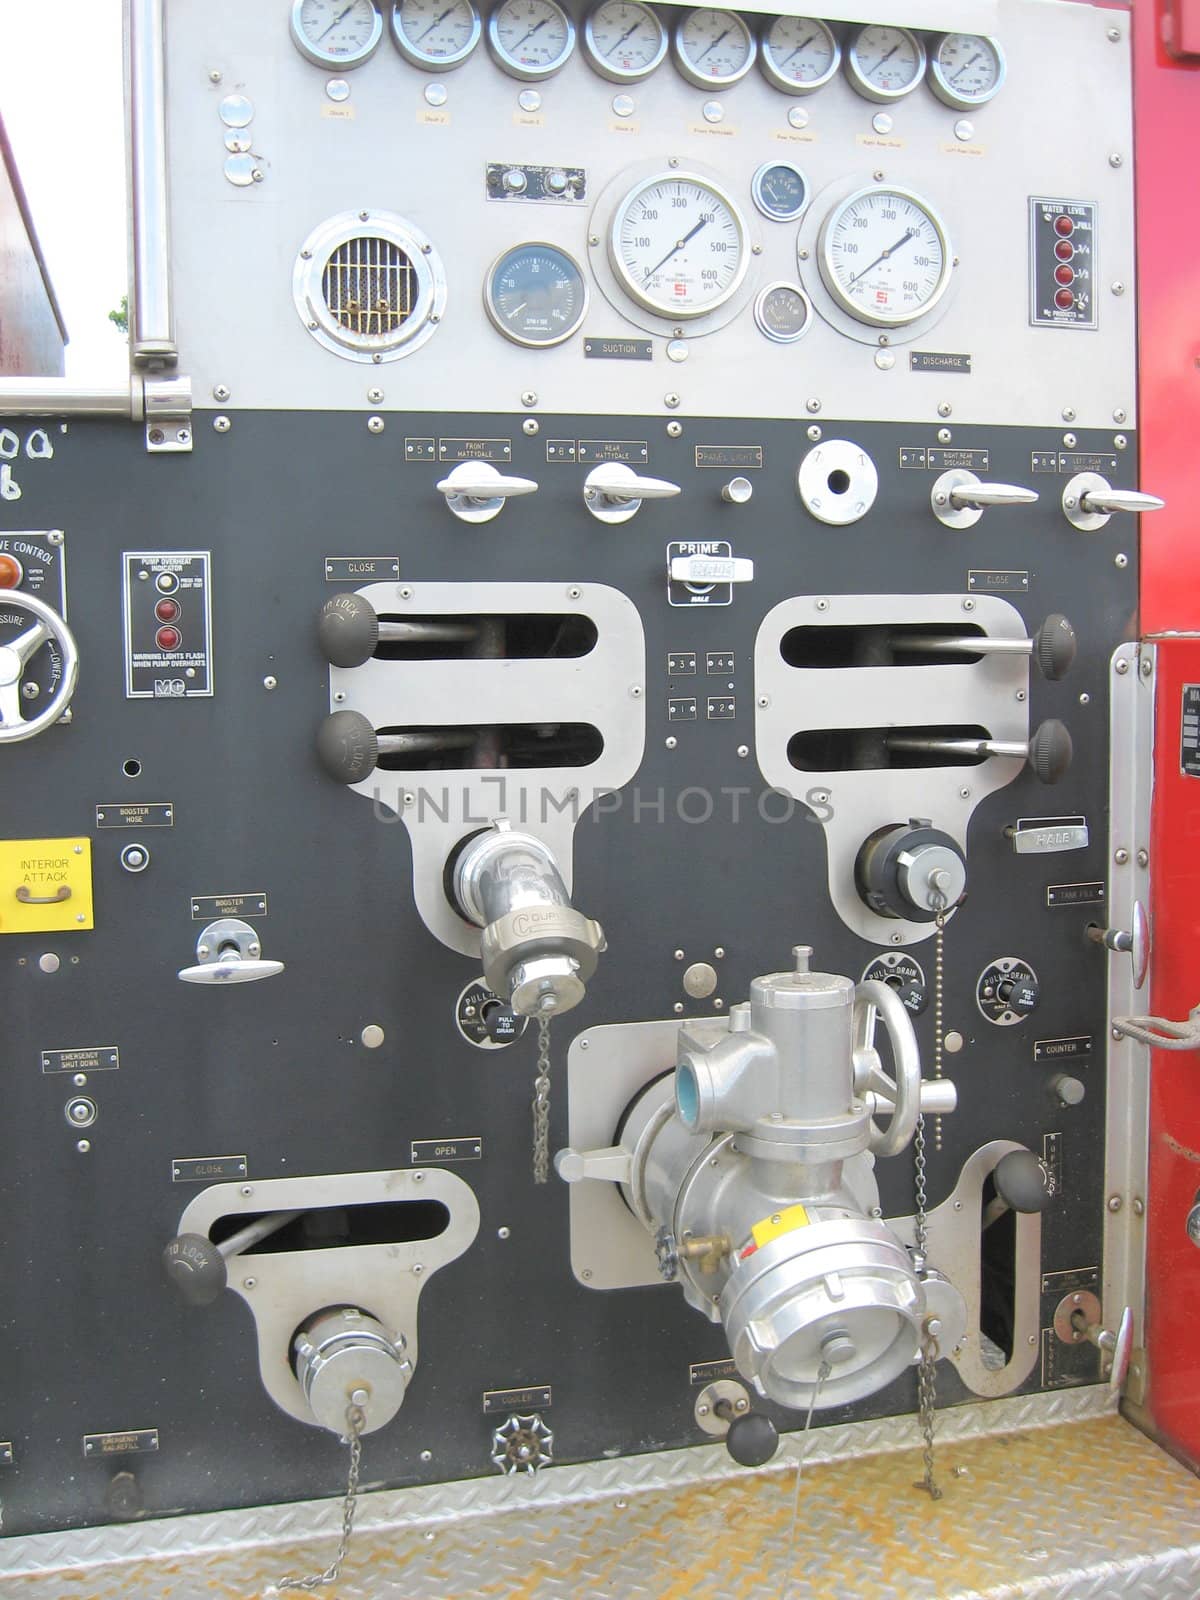 close-up view of fire truck's gauges